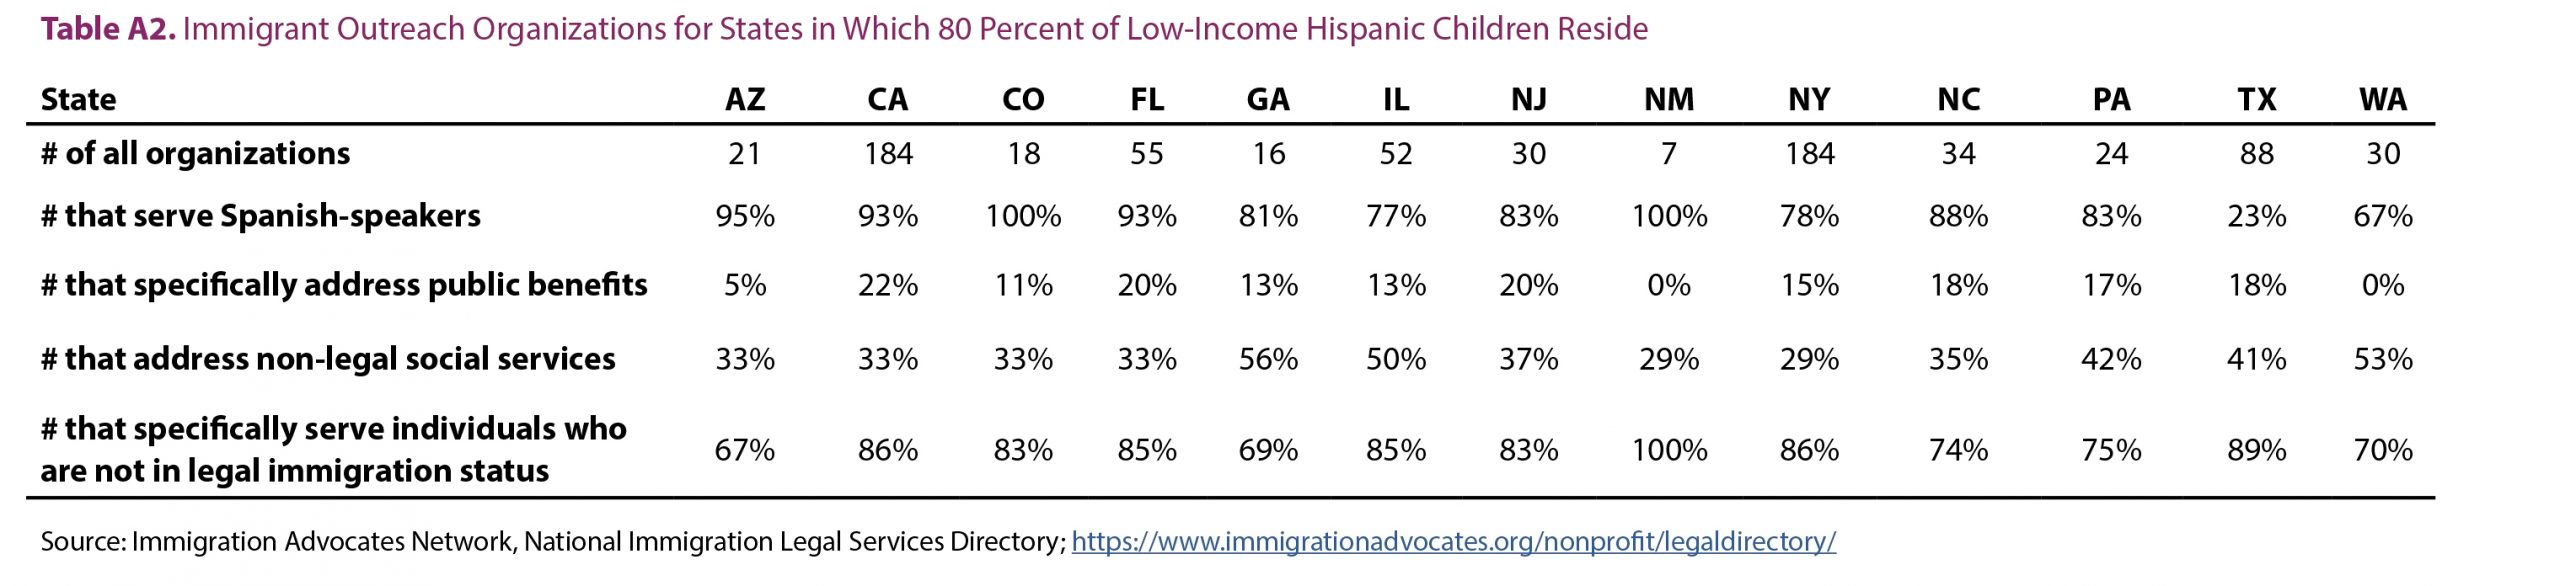 Table A2. Immigrant Outreach Organizations for States in Which 80 Percent of Low-Income Hispanic Children Reside